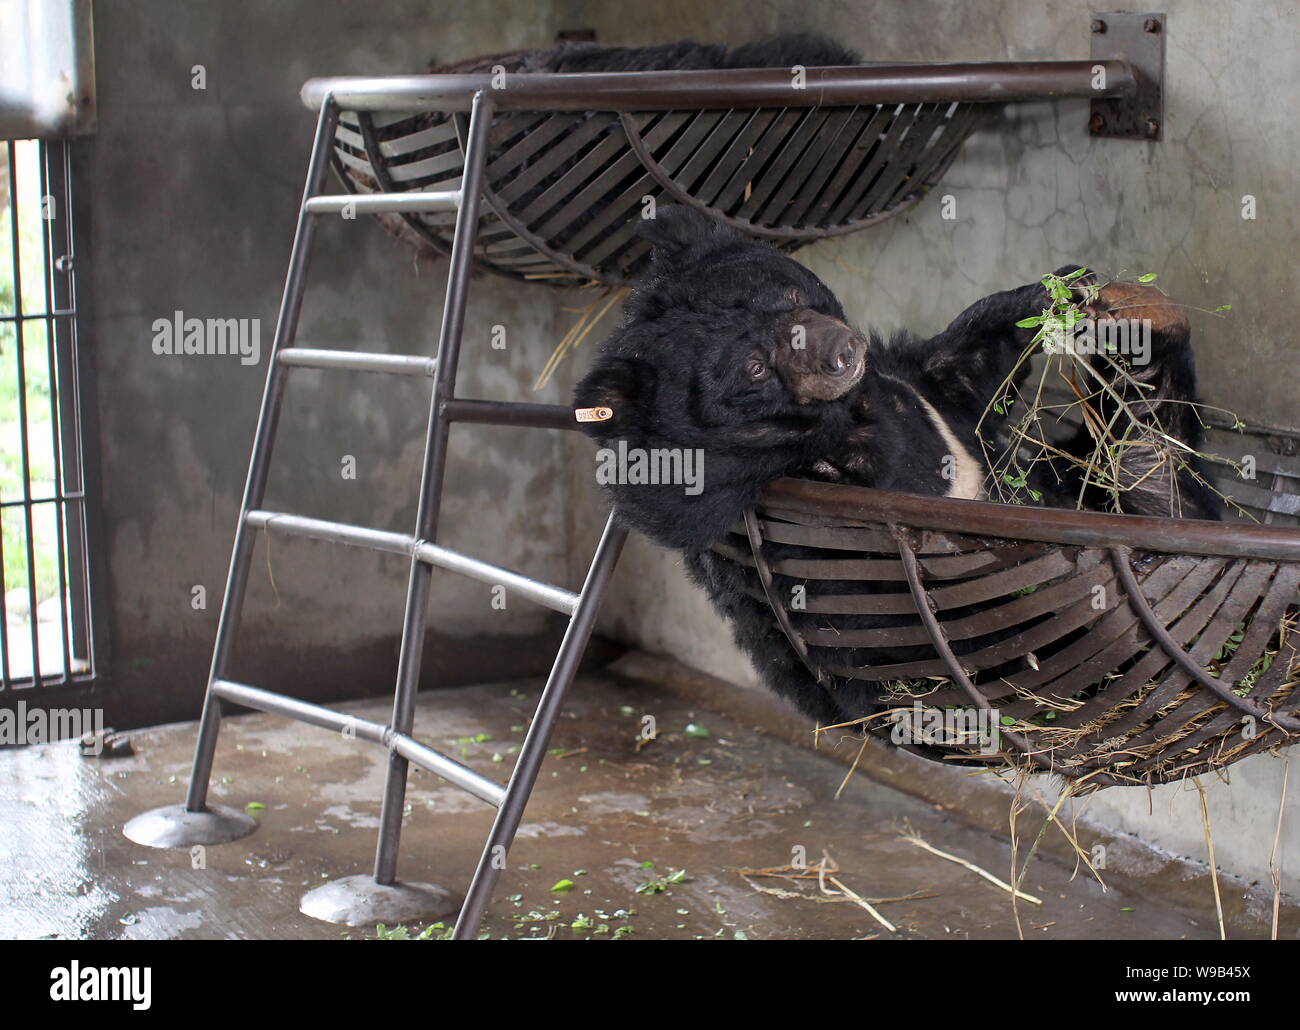 Two bears lie in their beds at a bear rescue center in Chengdu city, southwest Chinas Sichuan province, 26 April 2010.   Jill Robinson, the founder of Stock Photo